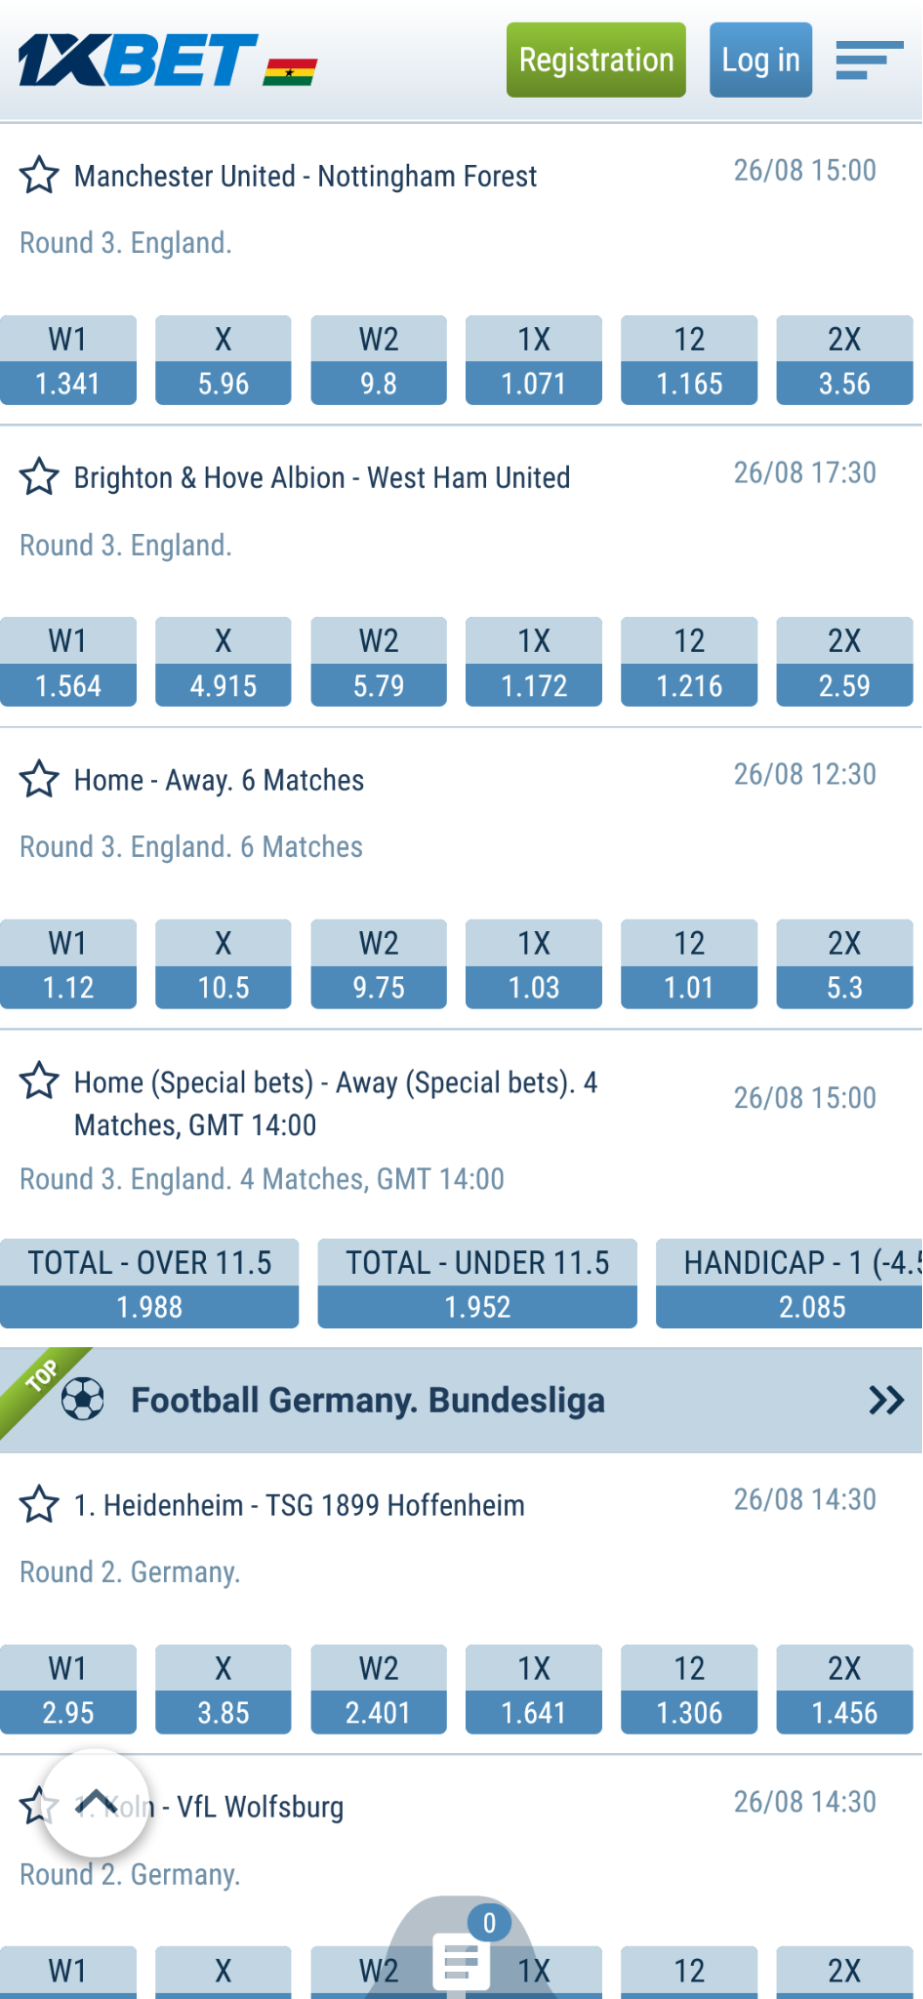 1xBet Android app image